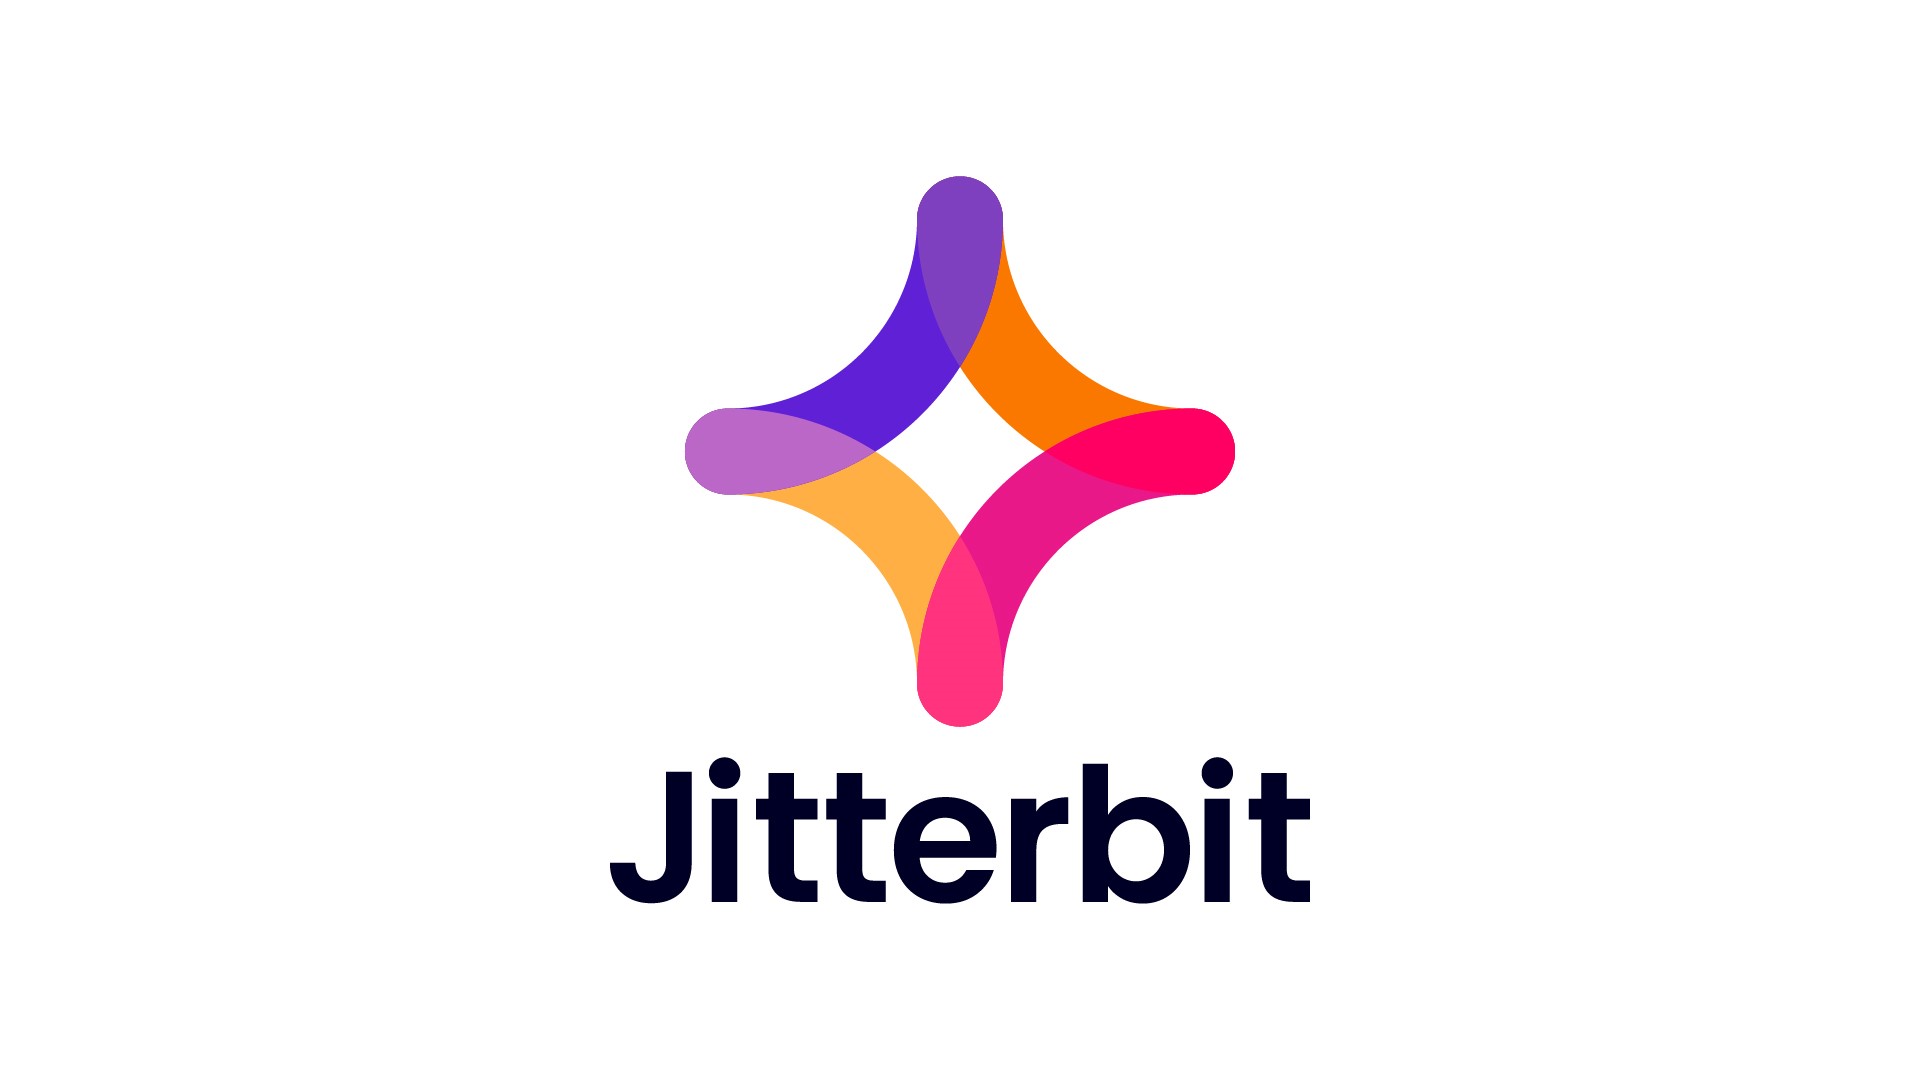 Jitterbit Survey Reveals Low-Code Application Platforms Play an Important Role in Automation